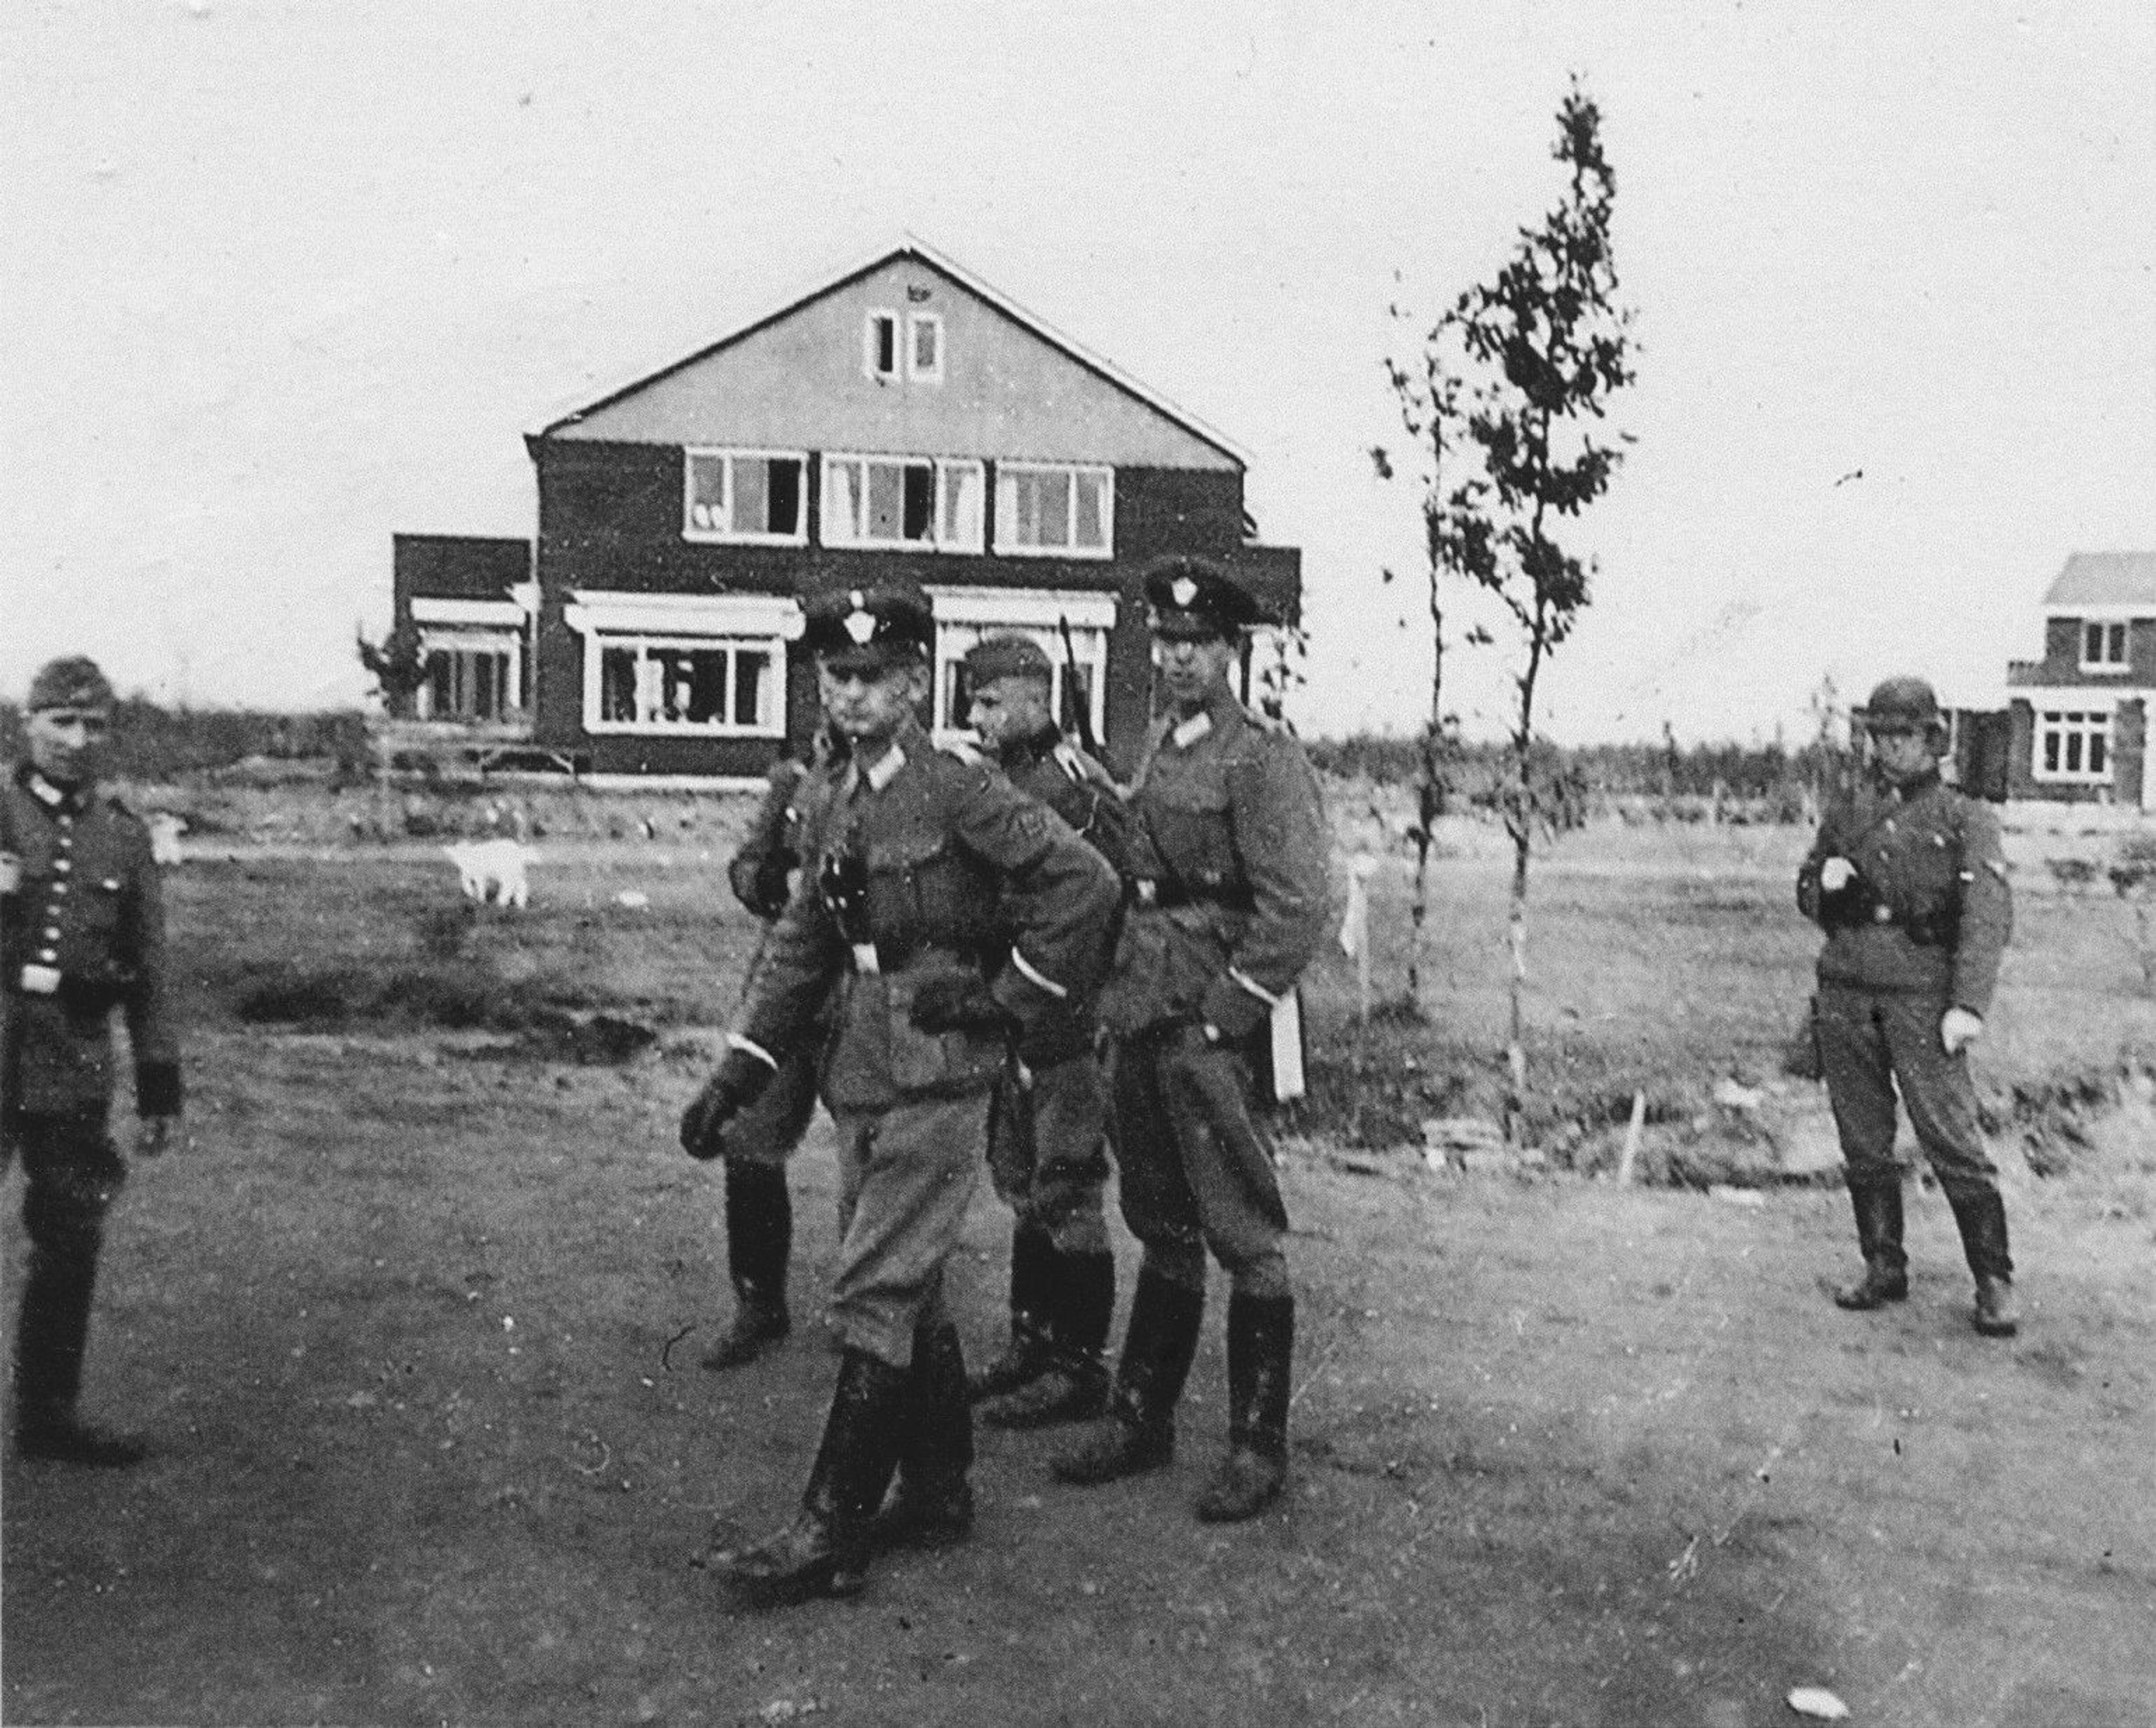 The Commander’s House and Police Battalion Bremen members, Westerbork, NL, 02/10/1942.